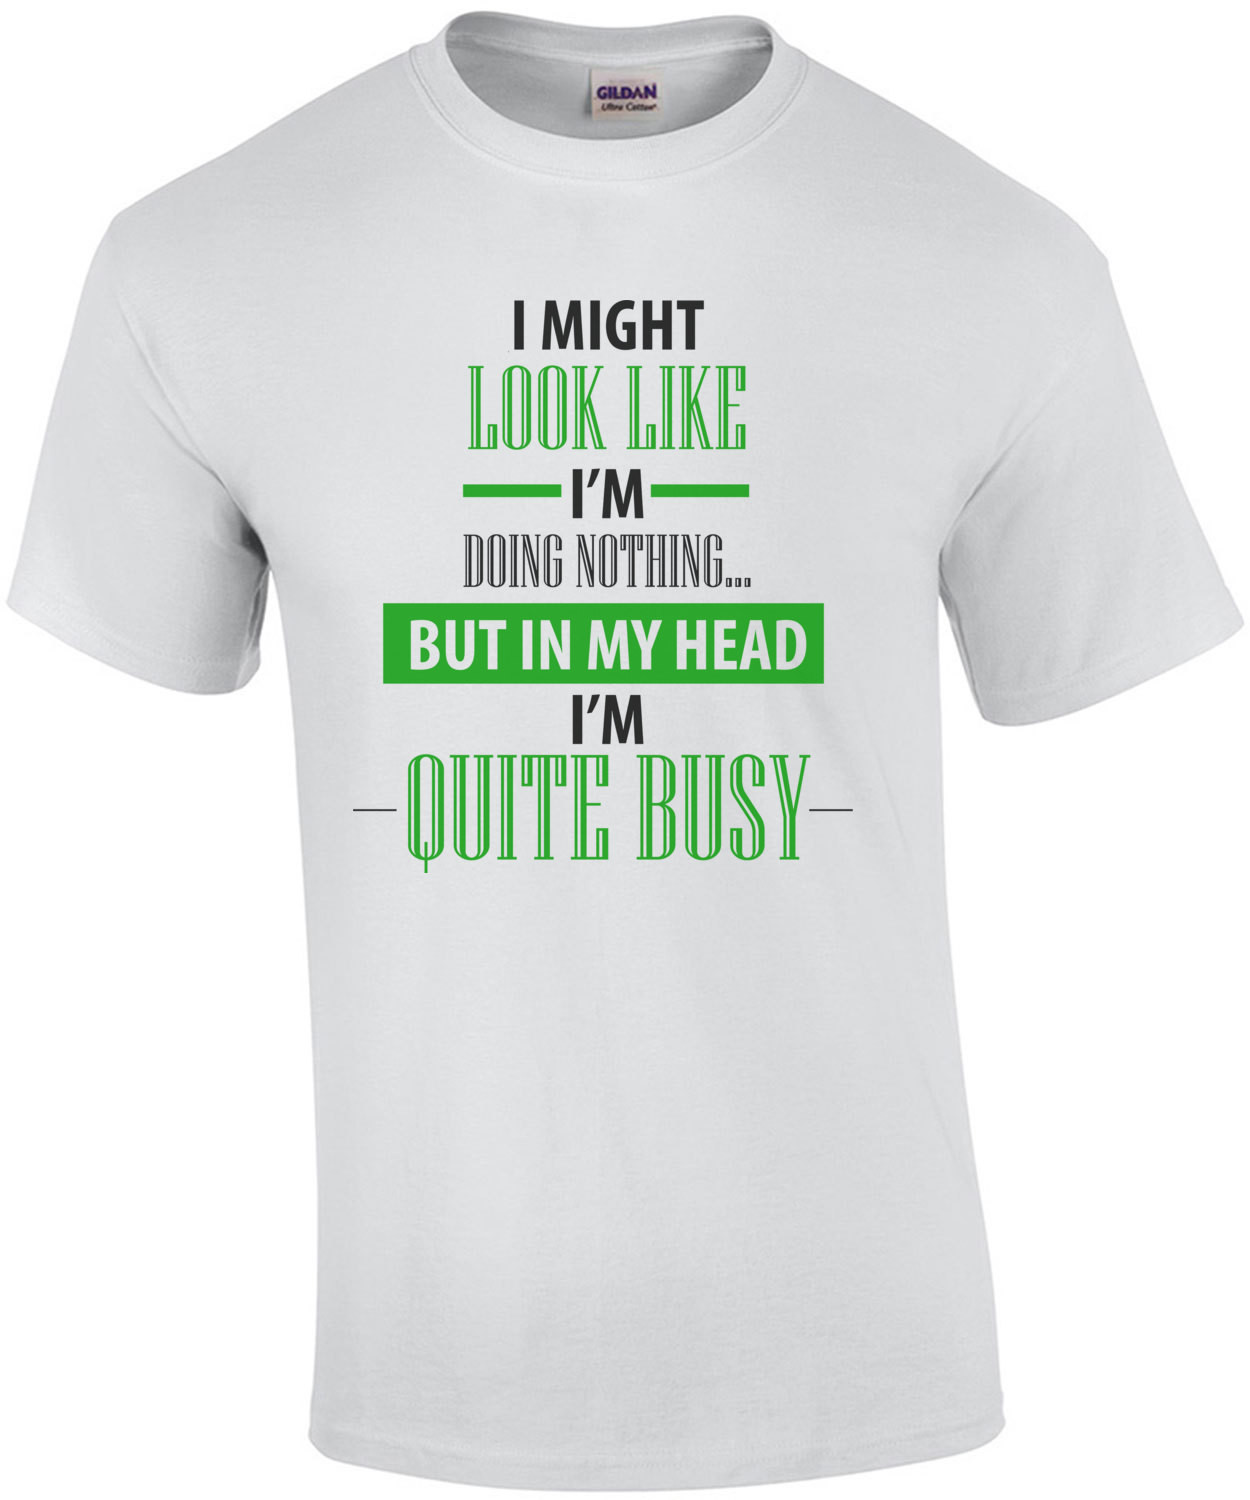 I Might Look Like I'm Doing Nothing... But In My Head I'm Quite Busy. Funny Sarcastic T-Shirt